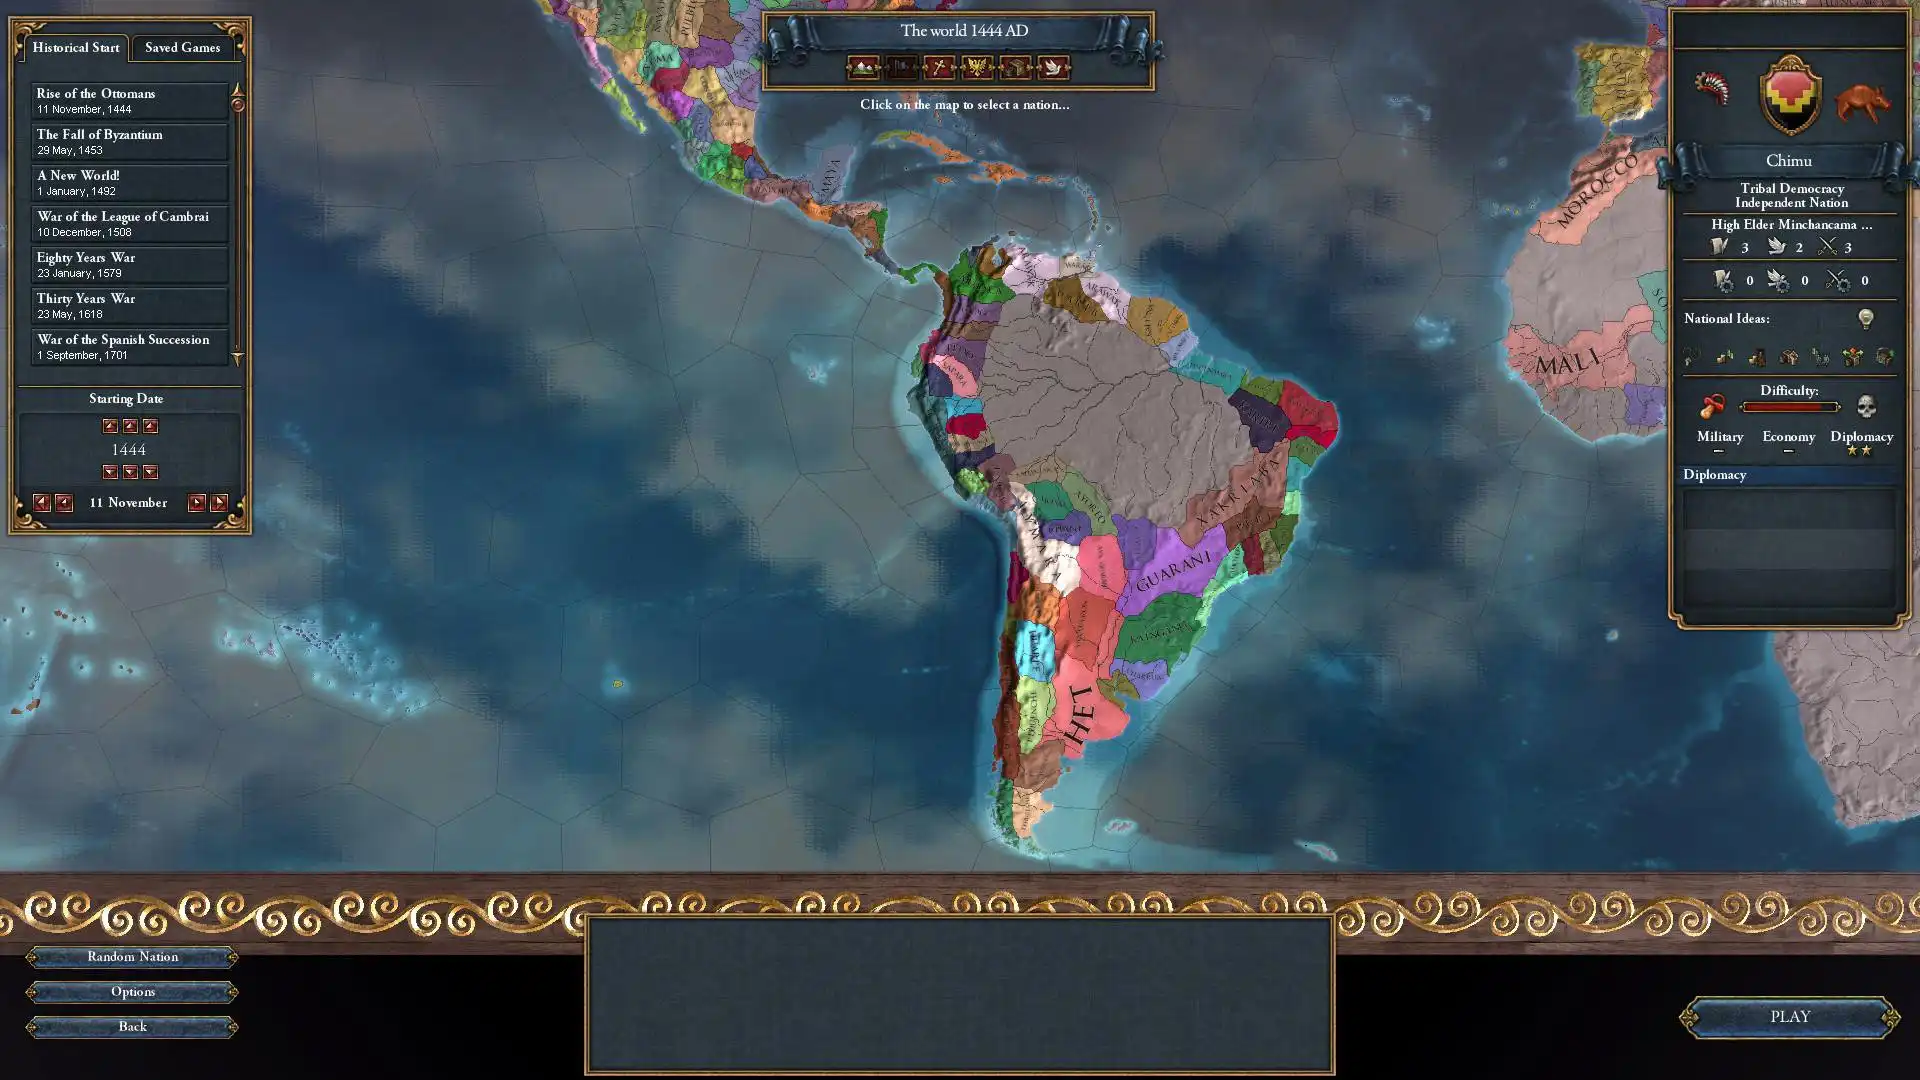 Download web tool or web app Europa Universalis IV: Homo Sapiens Mod to run in Linux online